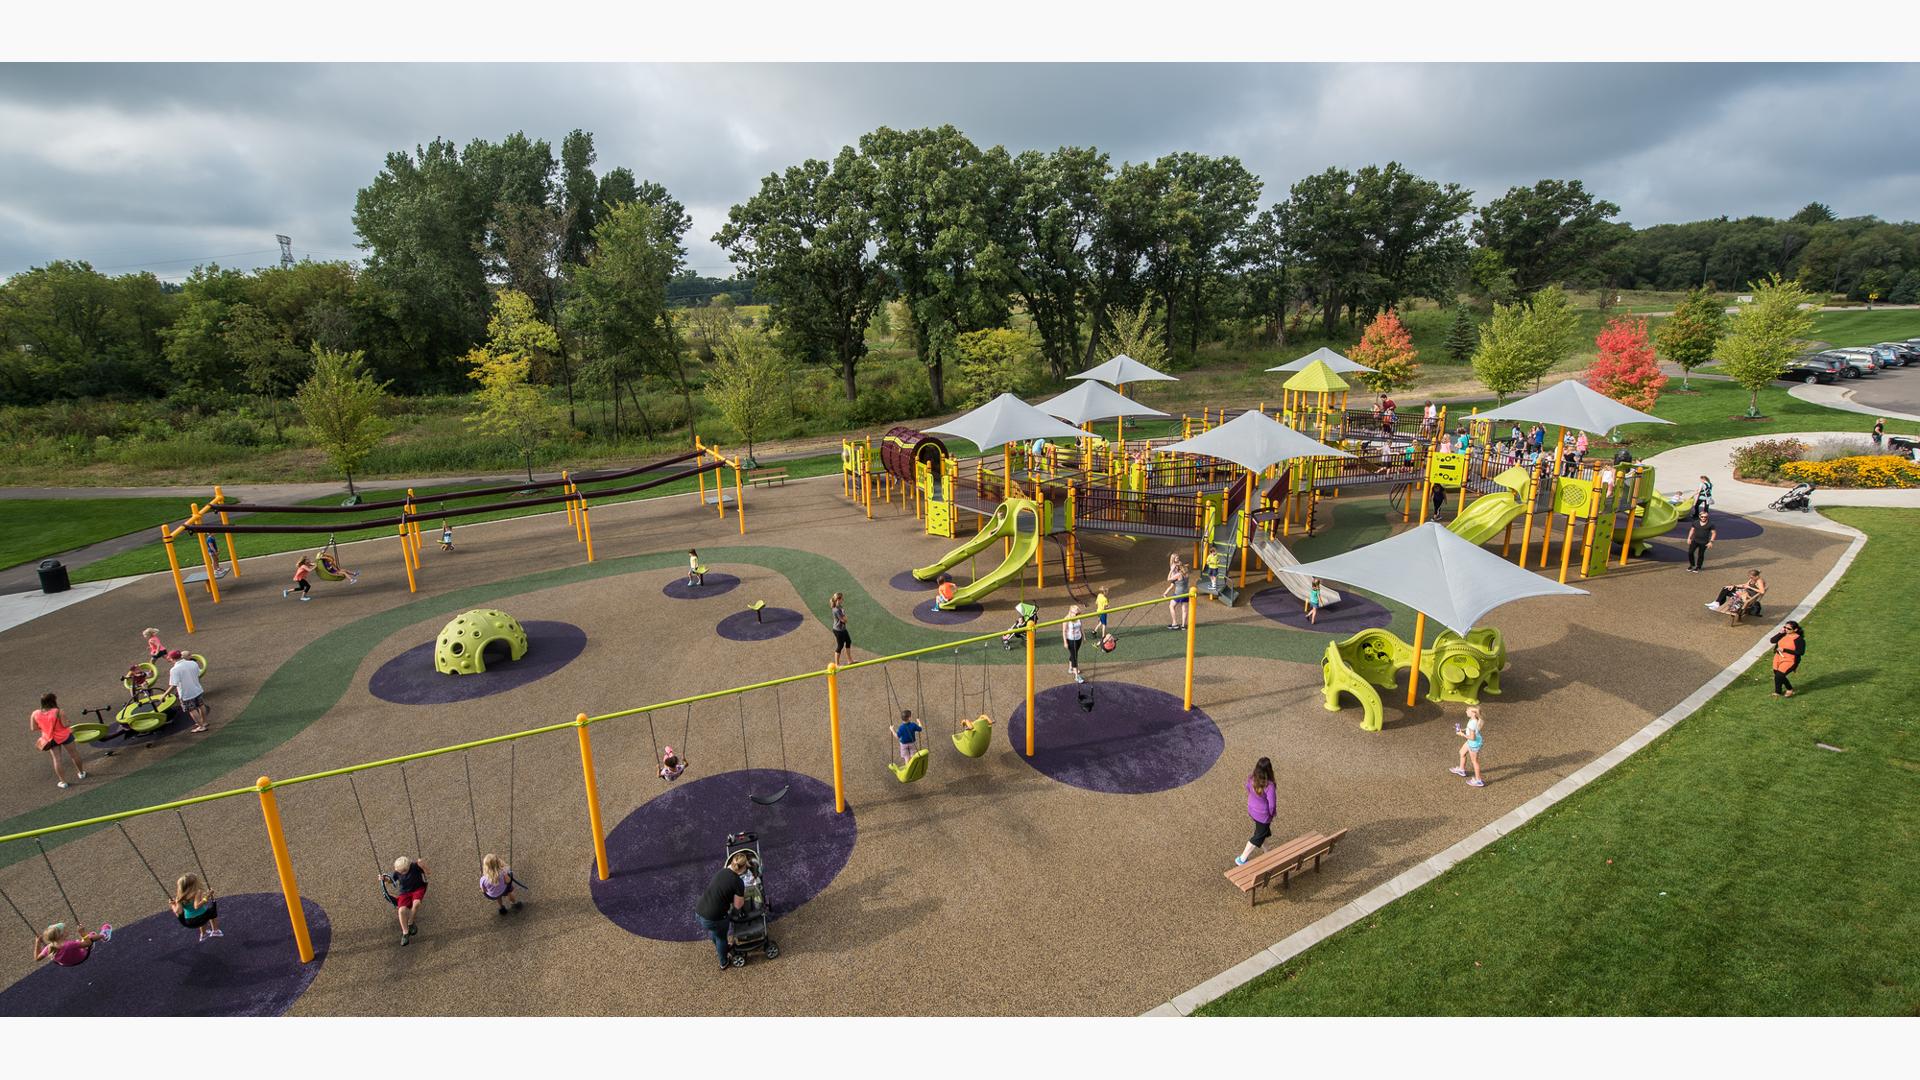 Madison's Place, Woodbury, MN is a a fully inclusive playground featuring the Sway Fun® Glider,  interactive sensory play panels like the Xylofun Panel®, CoolToppers® shade and ZipKrooz® zipline.